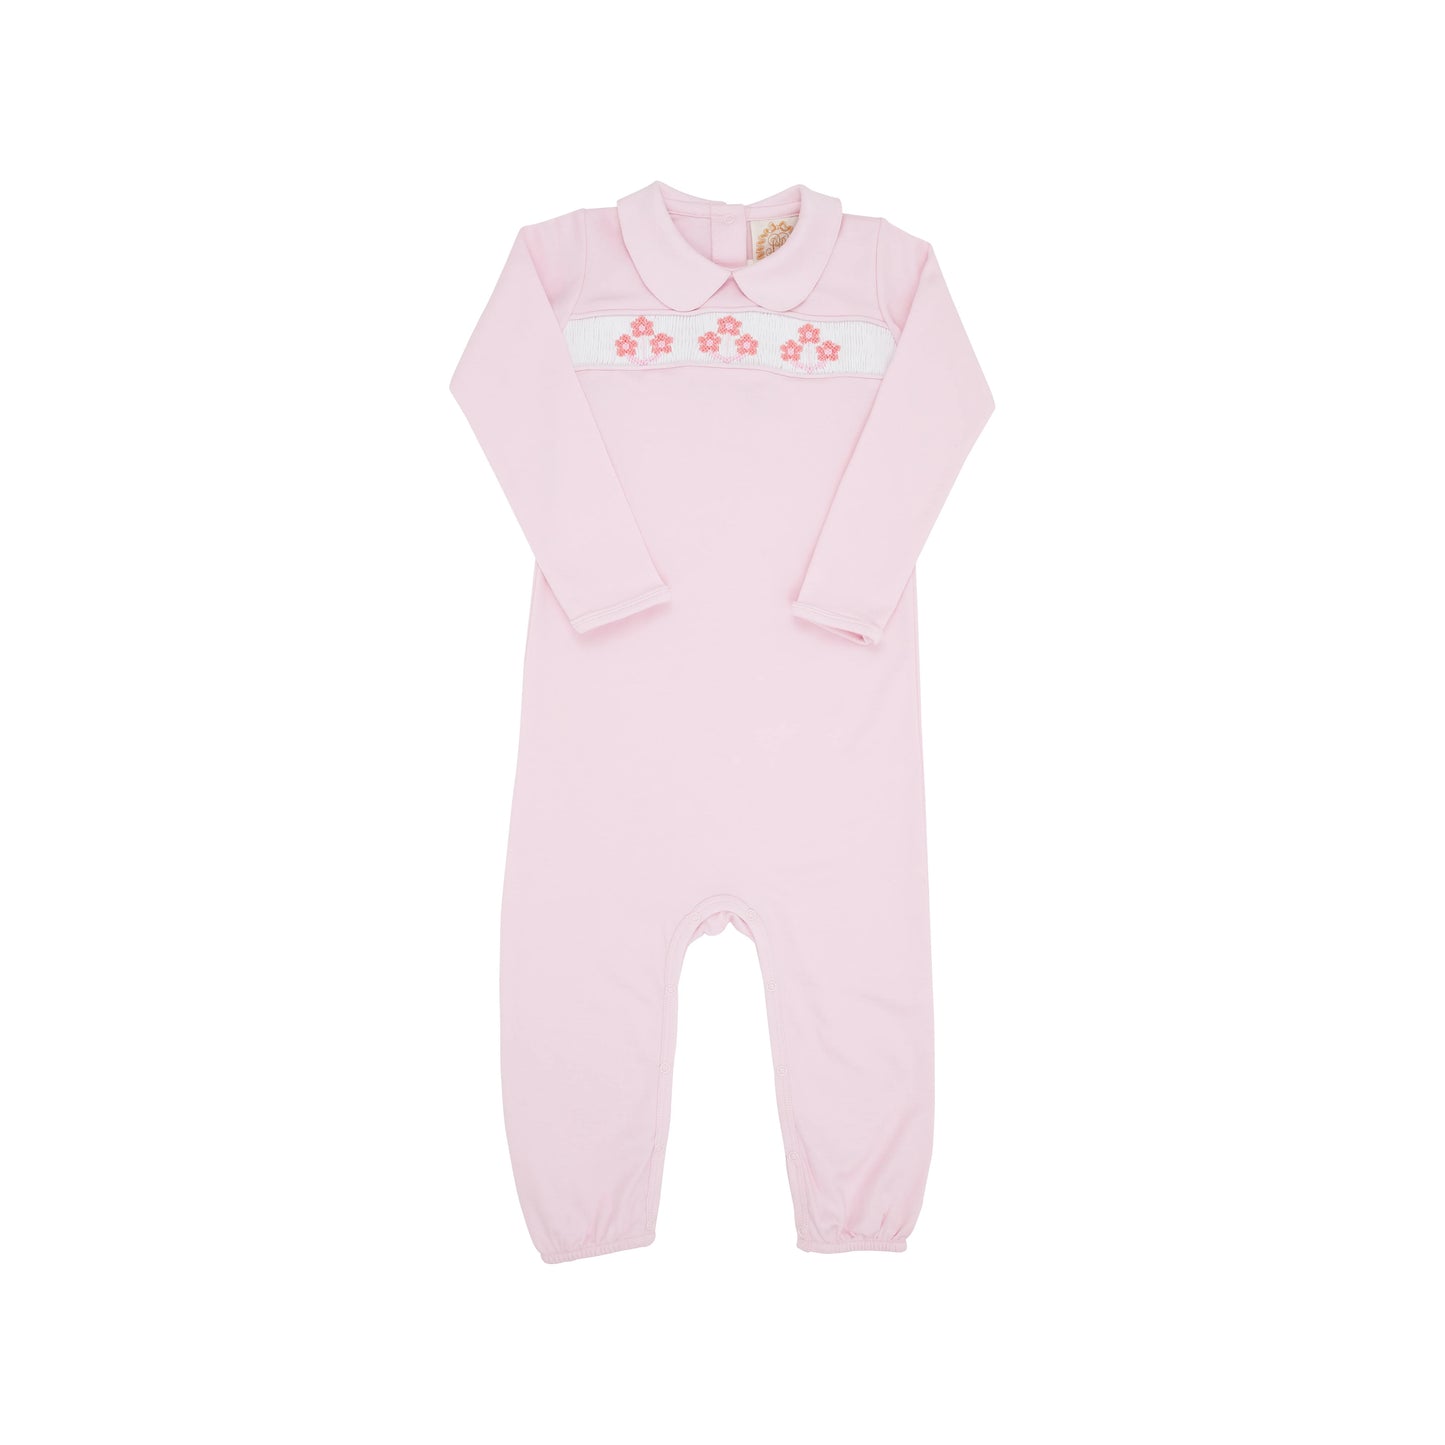 TBBC - Rigsby Romper Palm Beach Pink Flowers